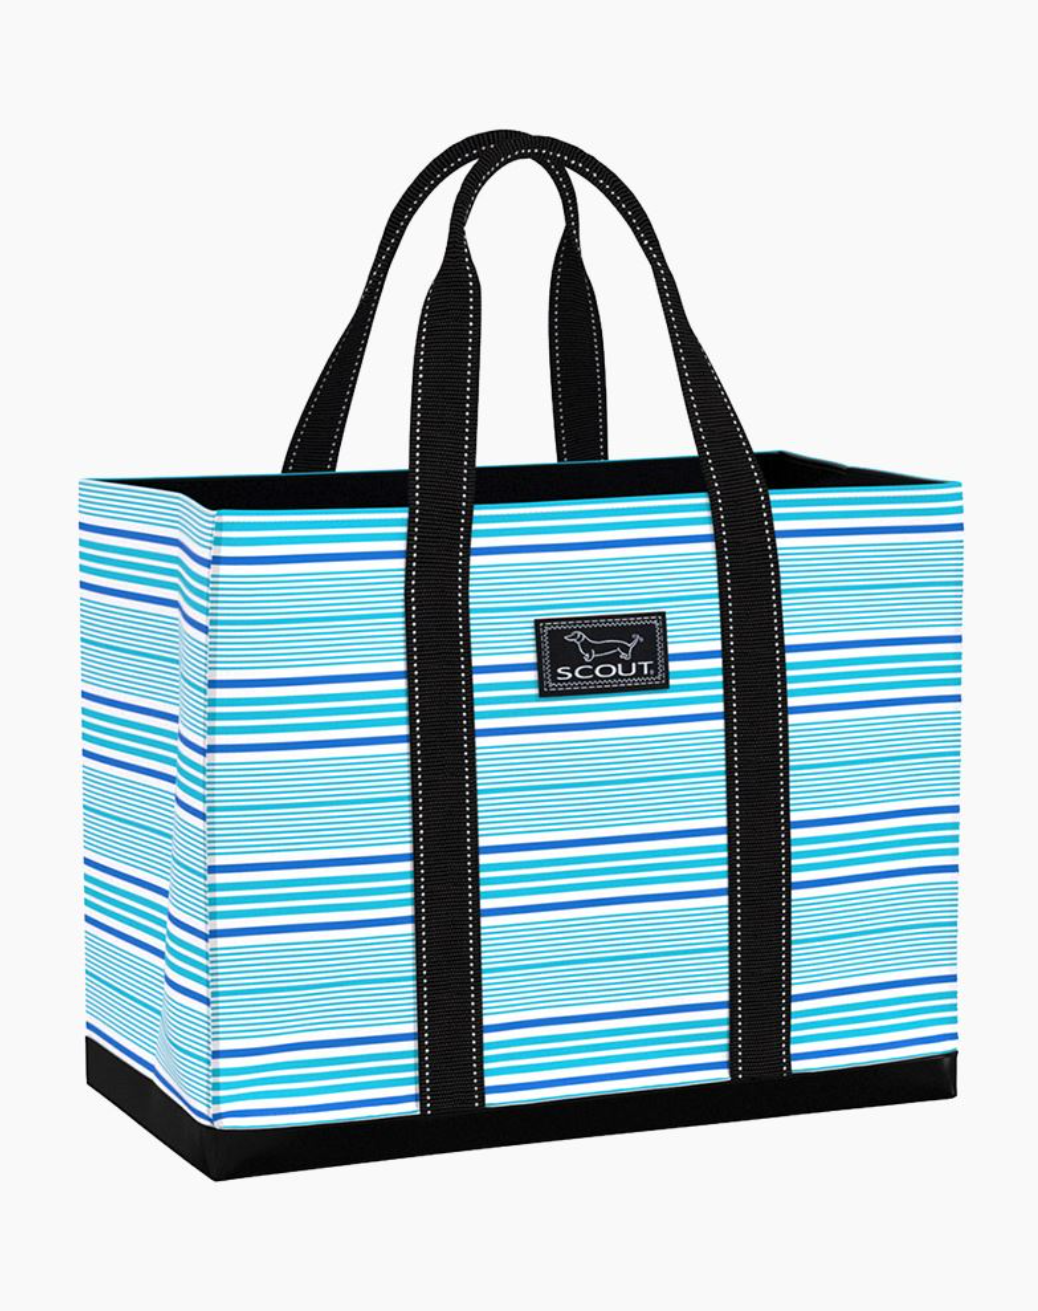 Scout Original Deano Tote Luggage, Totes in Seas the Day at Wrapsody